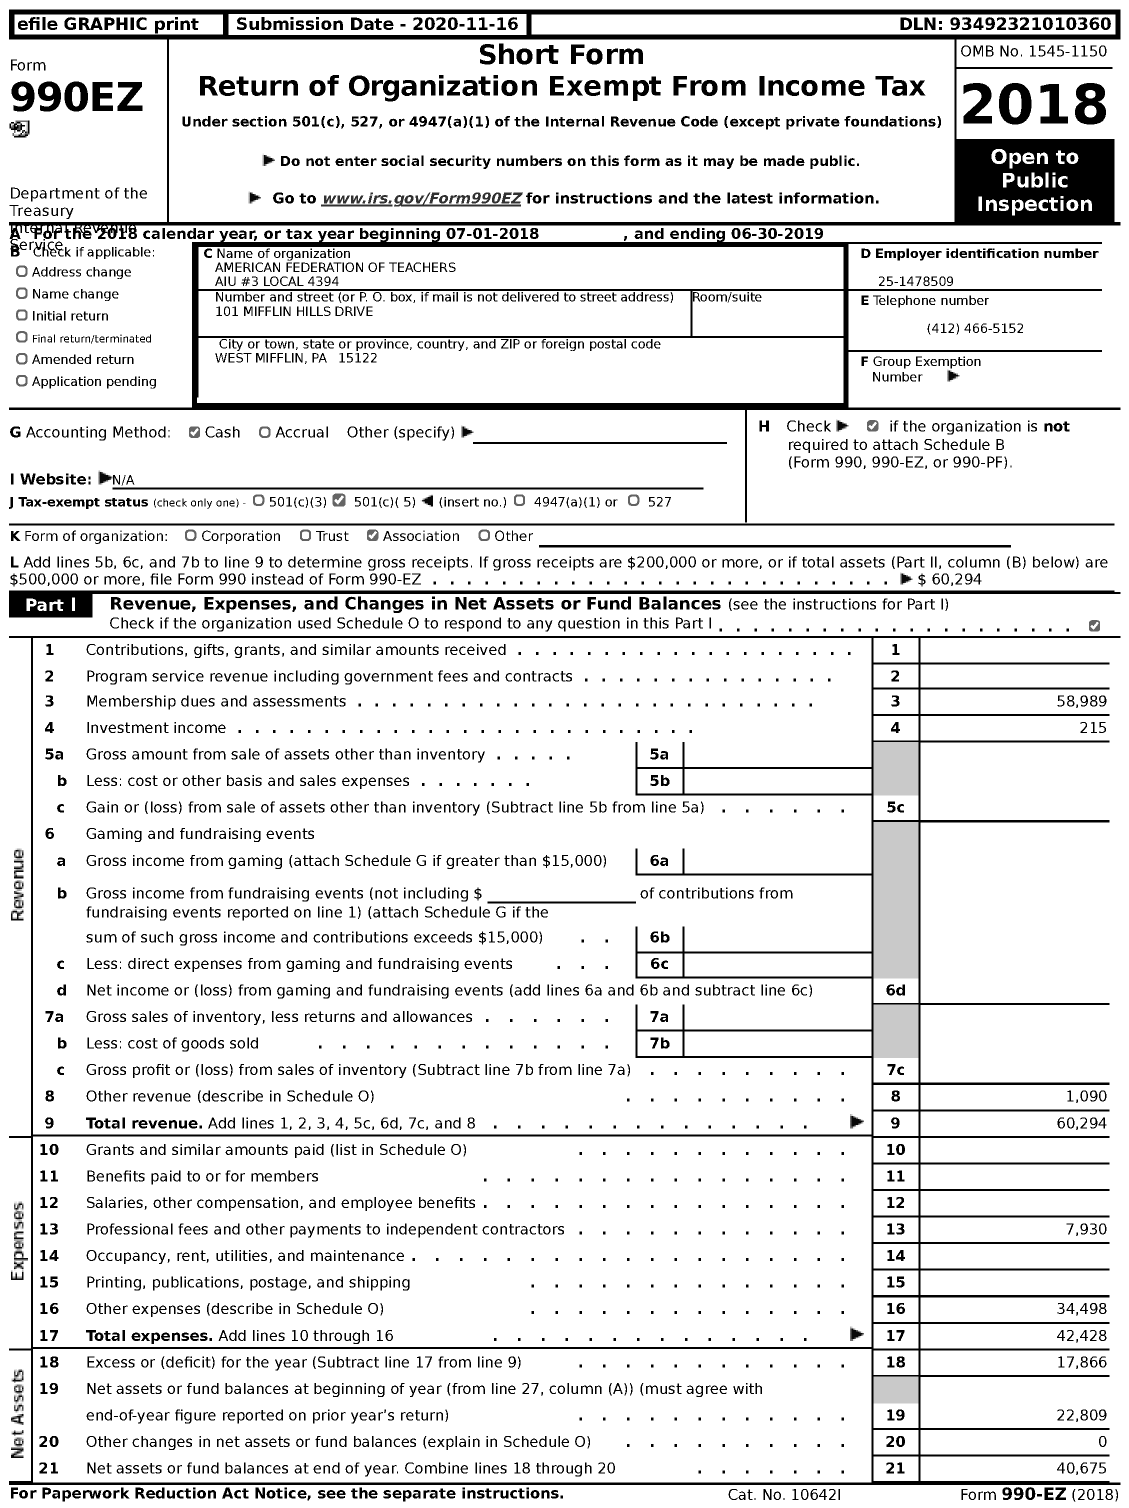 Image of first page of 2018 Form 990EZ for American Federation of Teachers Aiu #3 Local 4394